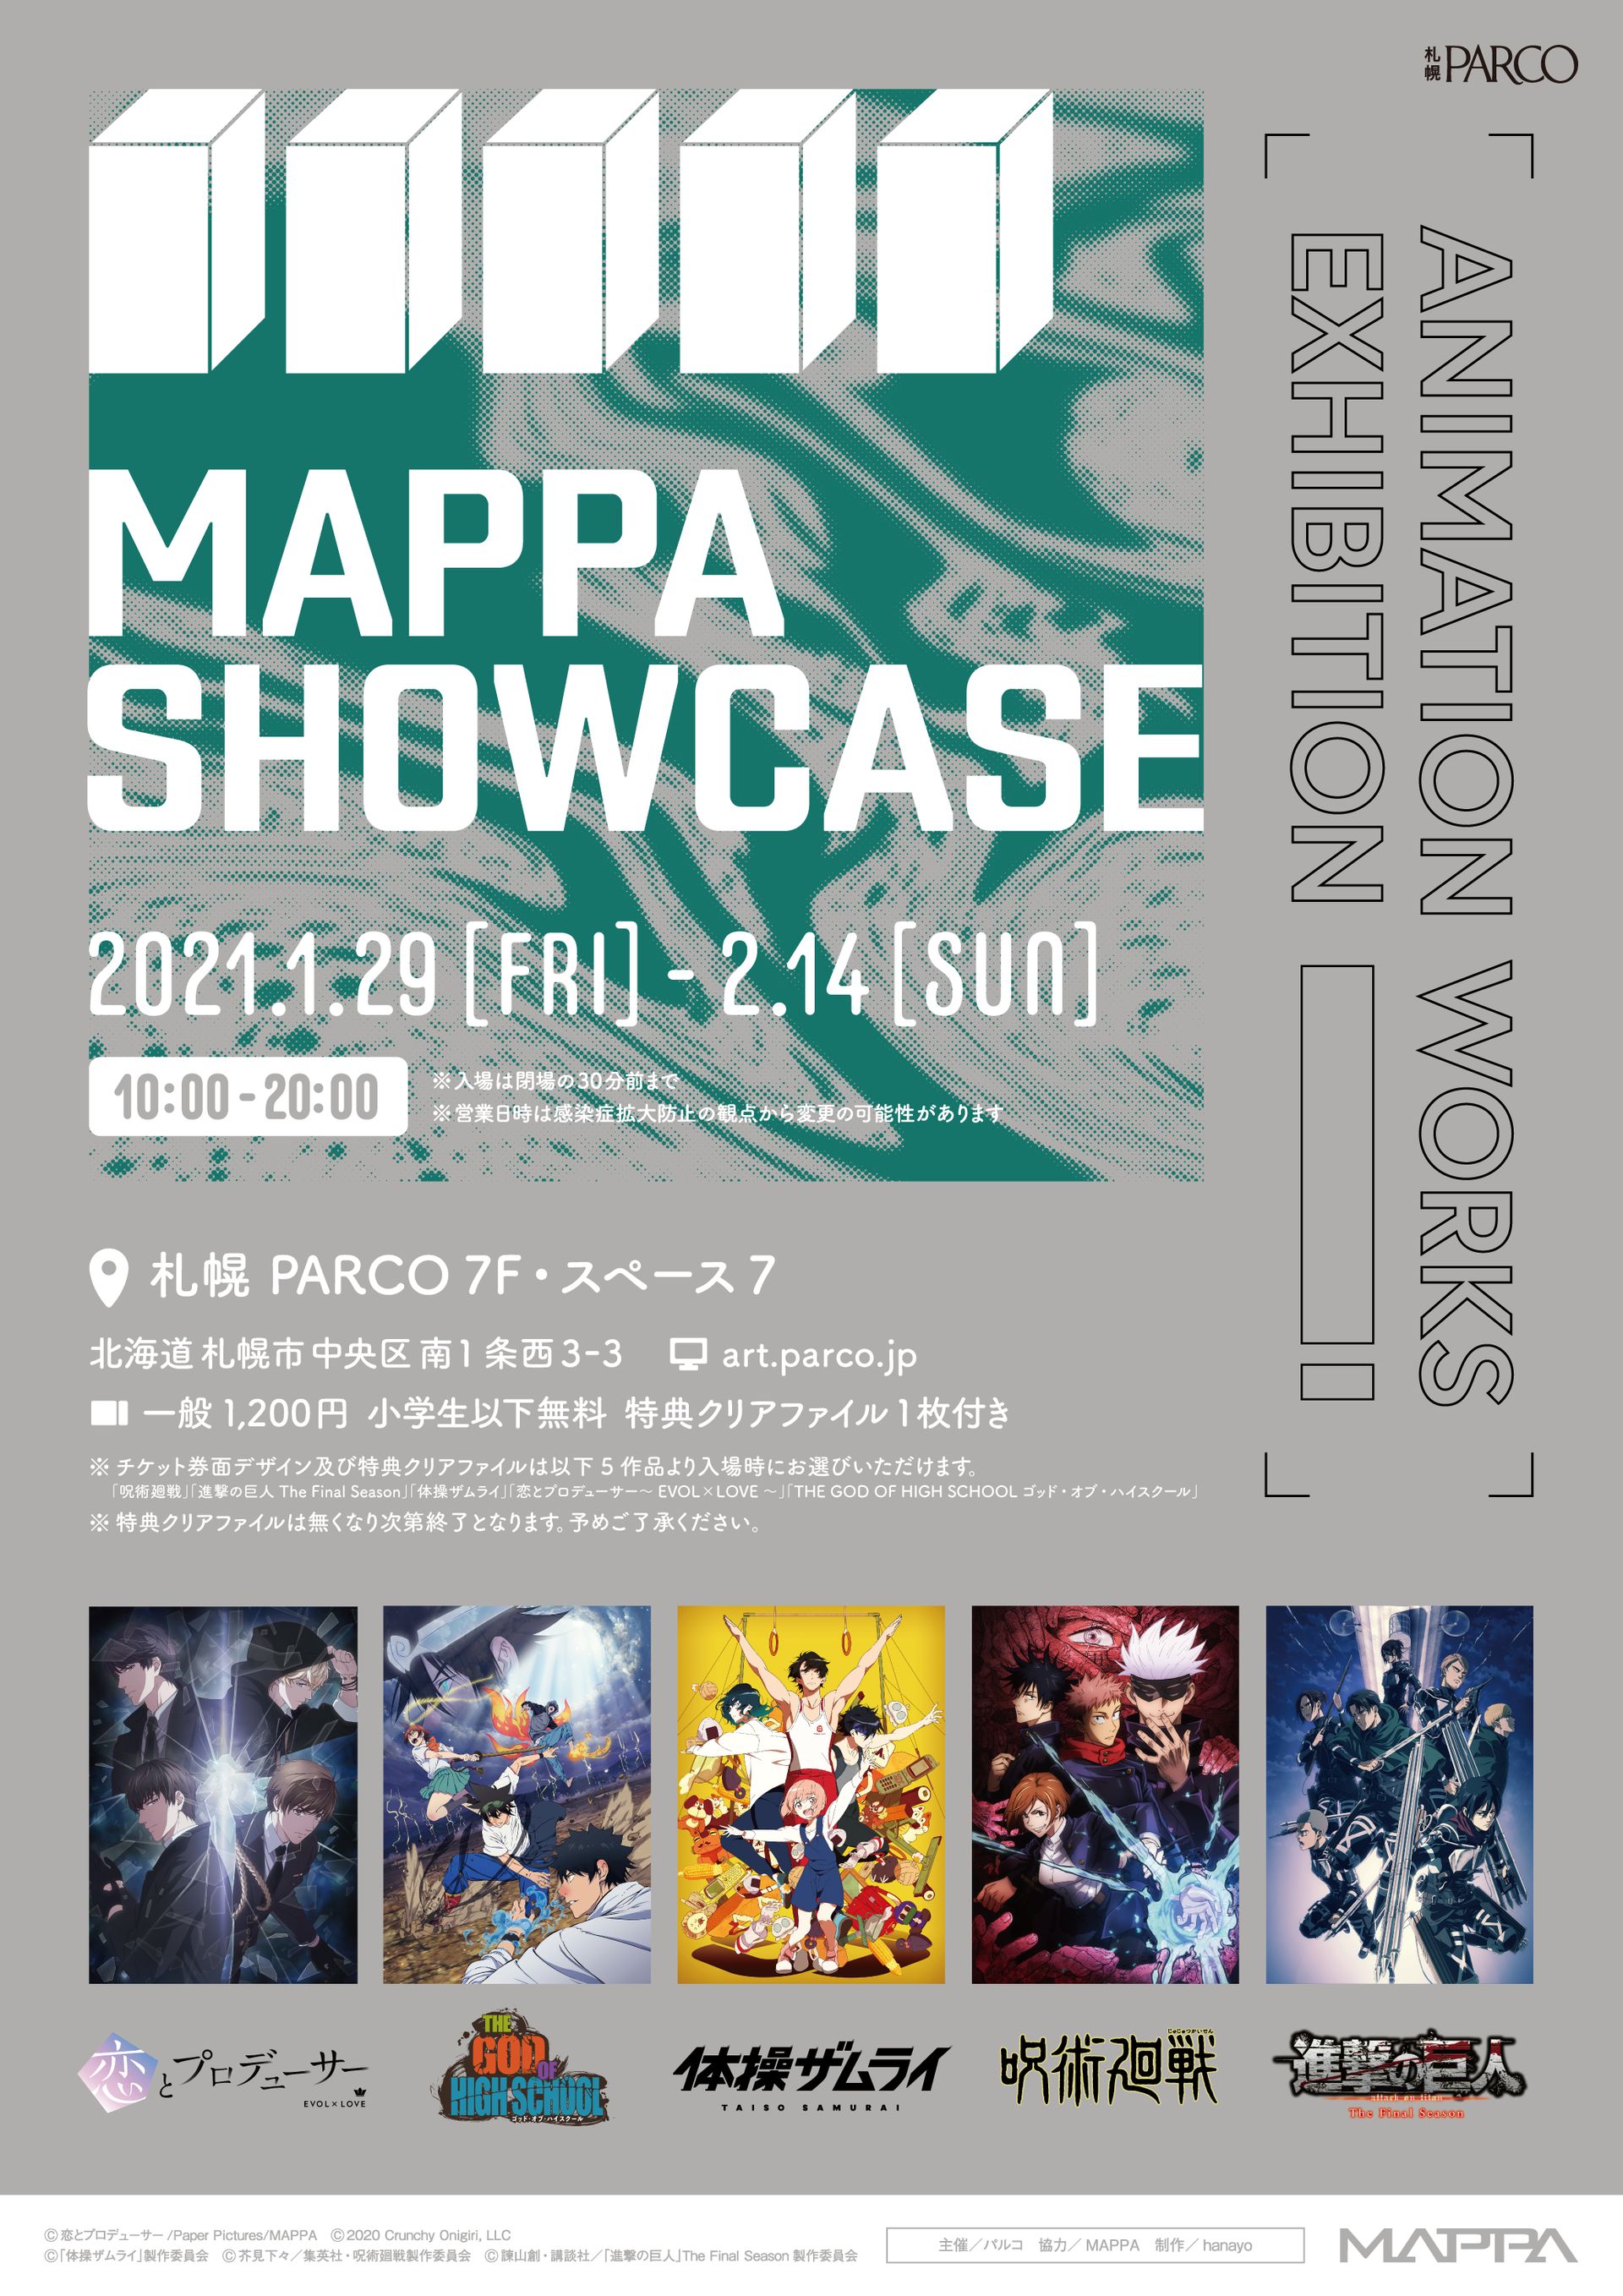 MAPPA SHOWCASE in 札幌」開催が決定！TVアニメ「呪術廻戦」、「進撃の